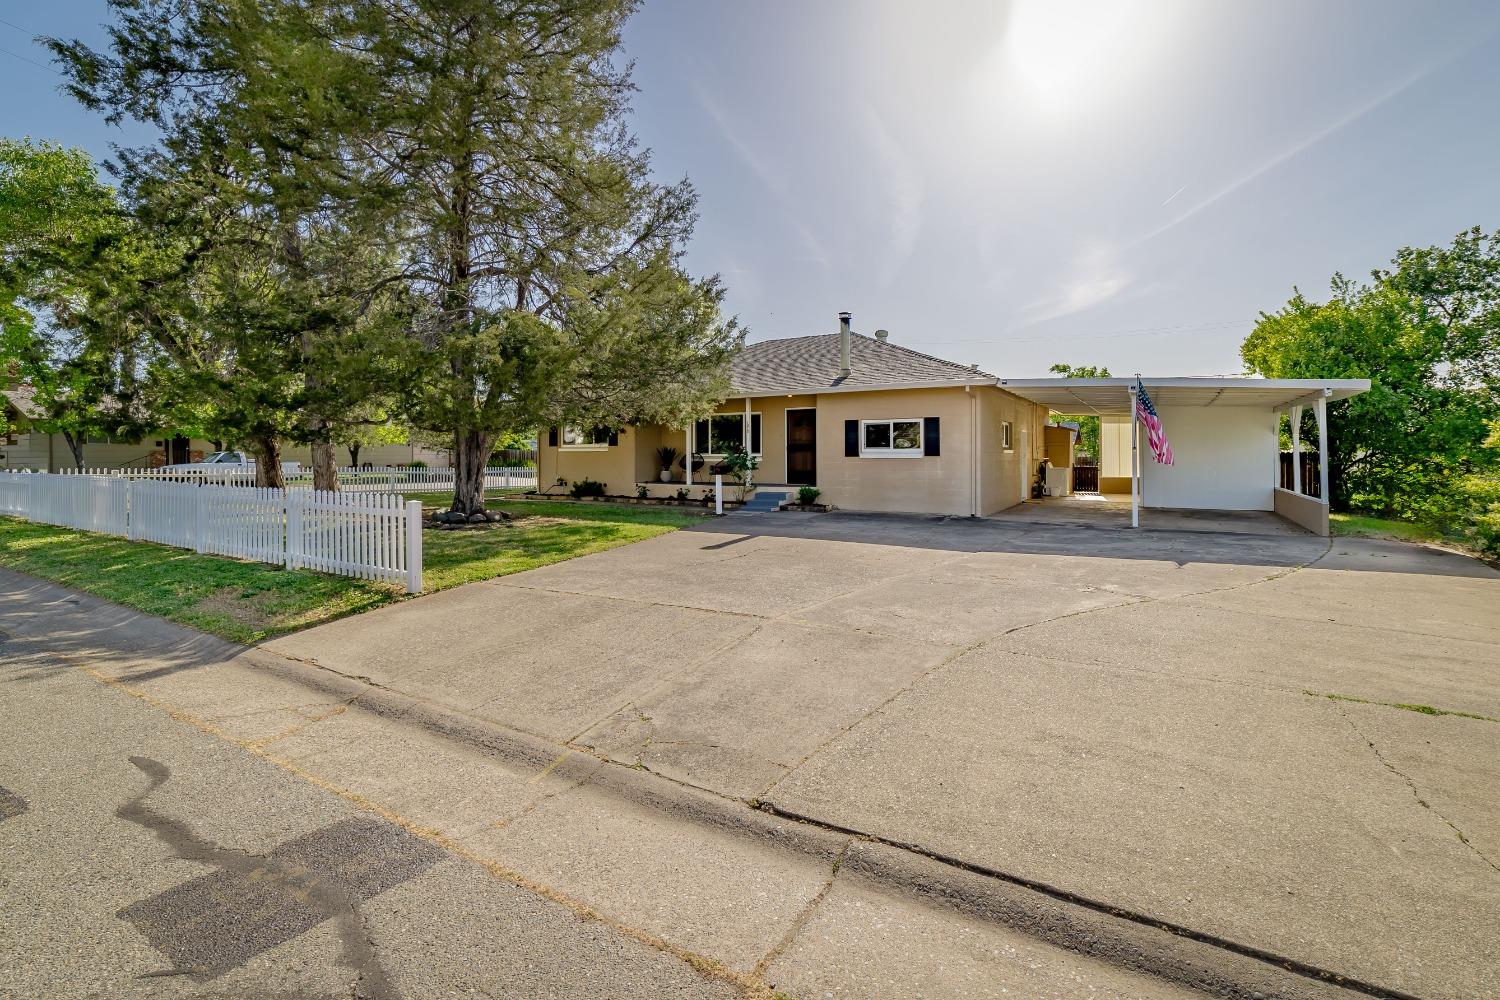 Photo of 1012 Harrison Ave in Lincoln, CA